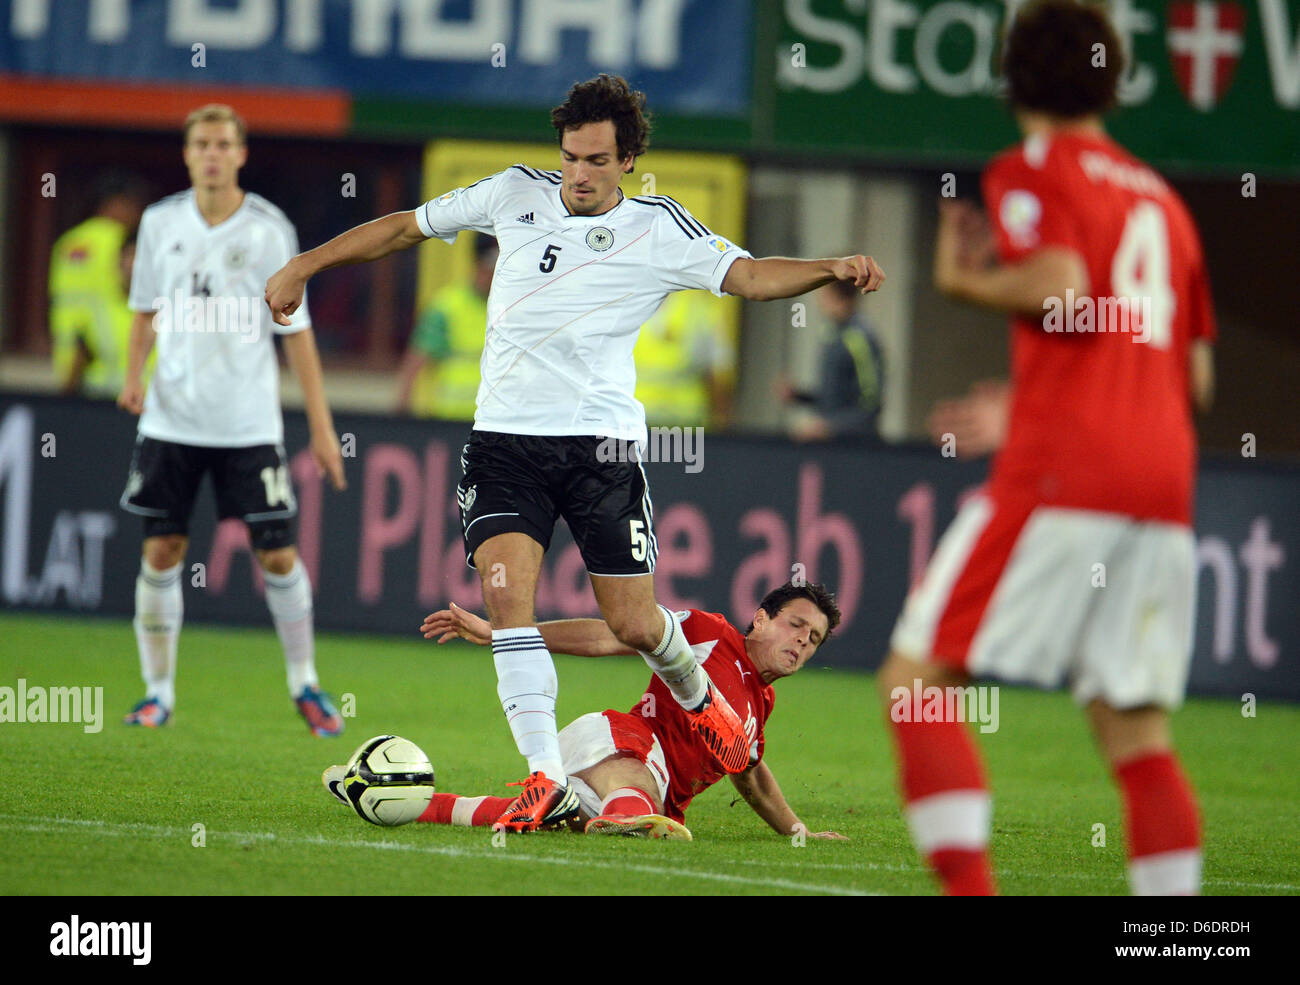 Germany's Mats Hummels vies for the ball with Austria's Zlatko Junuzovic (bottom) during the Group C World Cup 2014 qualifying match between Austria and Germany at Ernst-Happel stadium in Vienna, Austria, 11 September 2012. Photo: Peter Steffen dpa  +++(c) dpa - Bildfunk+++ Stock Photo